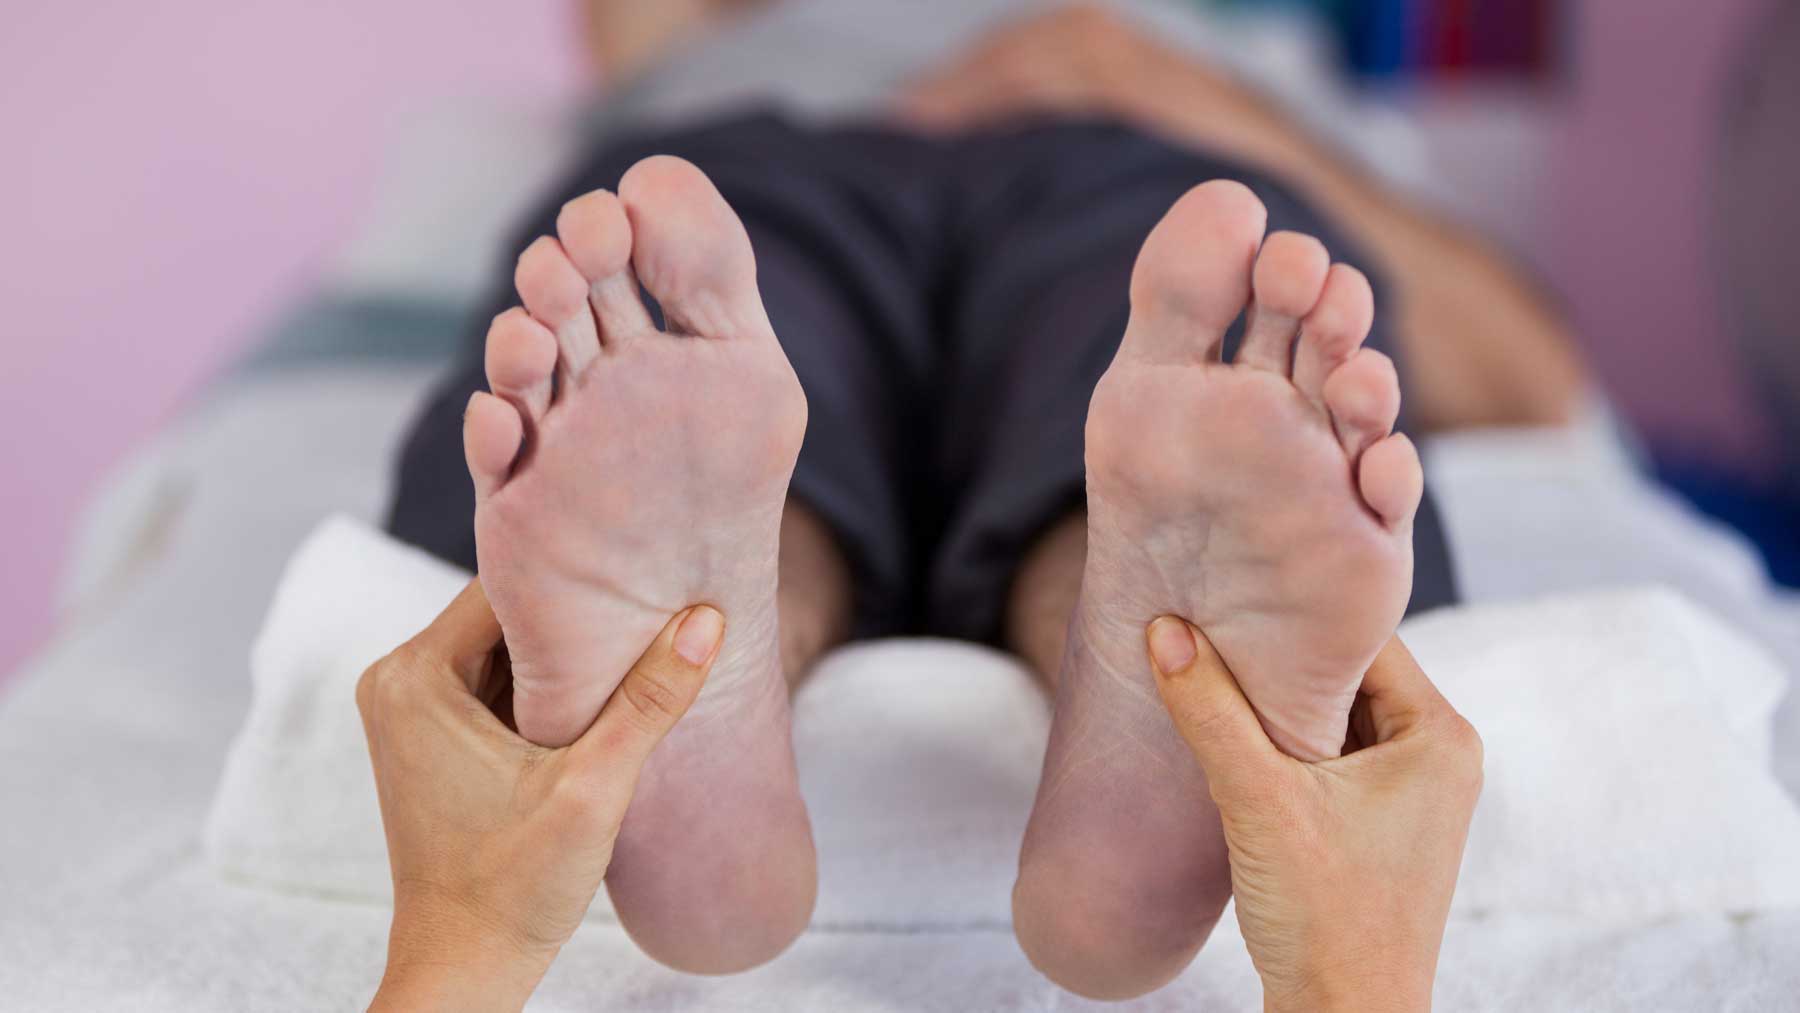 What are the simple tips for diabetic foot care? - Quora